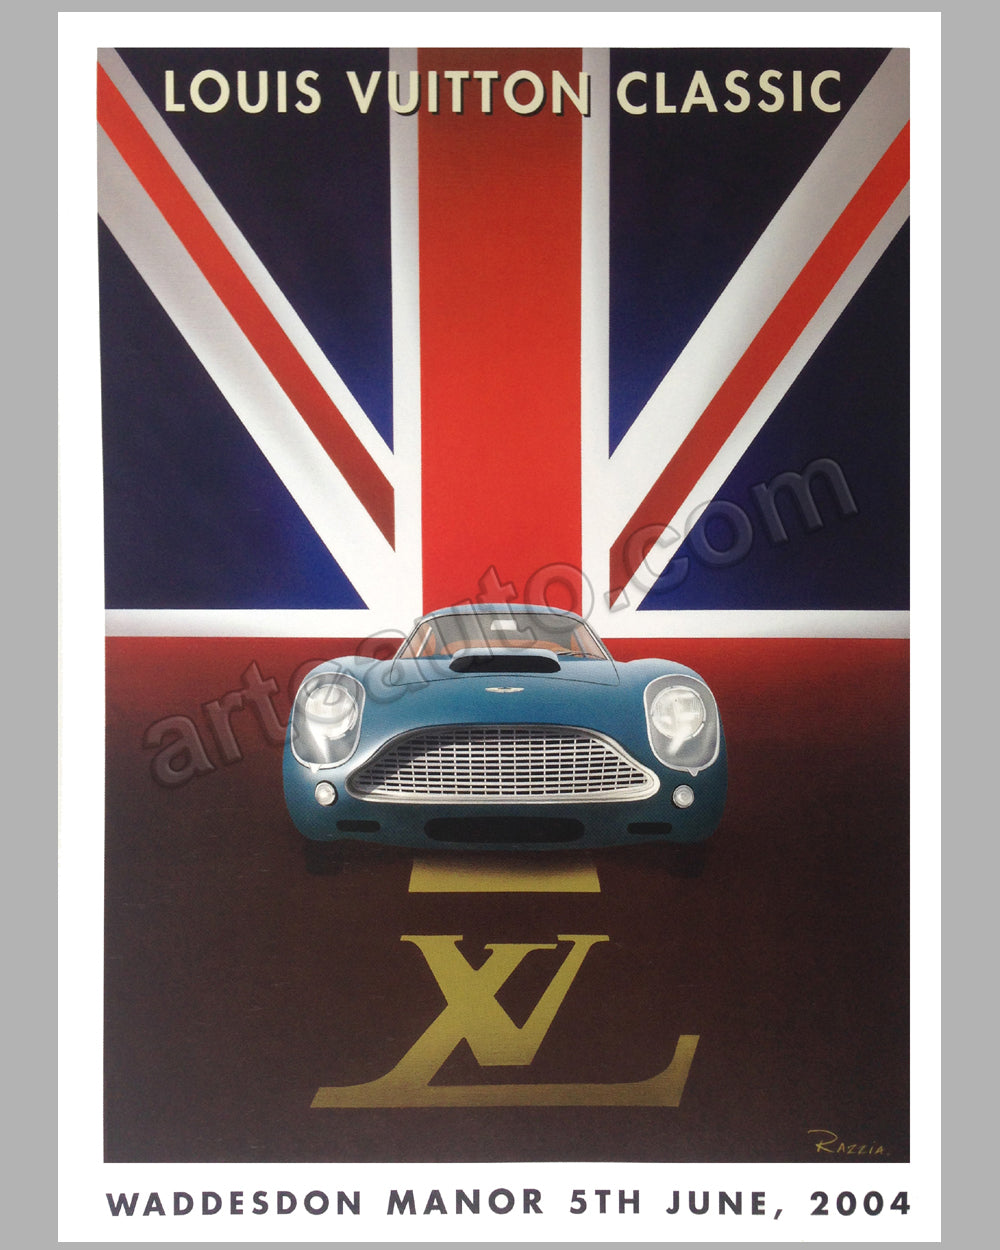 Louis Vuitton Classic 2004 Waddesdon Manor Concours d'Elegance U.K. poster  by Razzia Temporarily Out of Stock$425.00